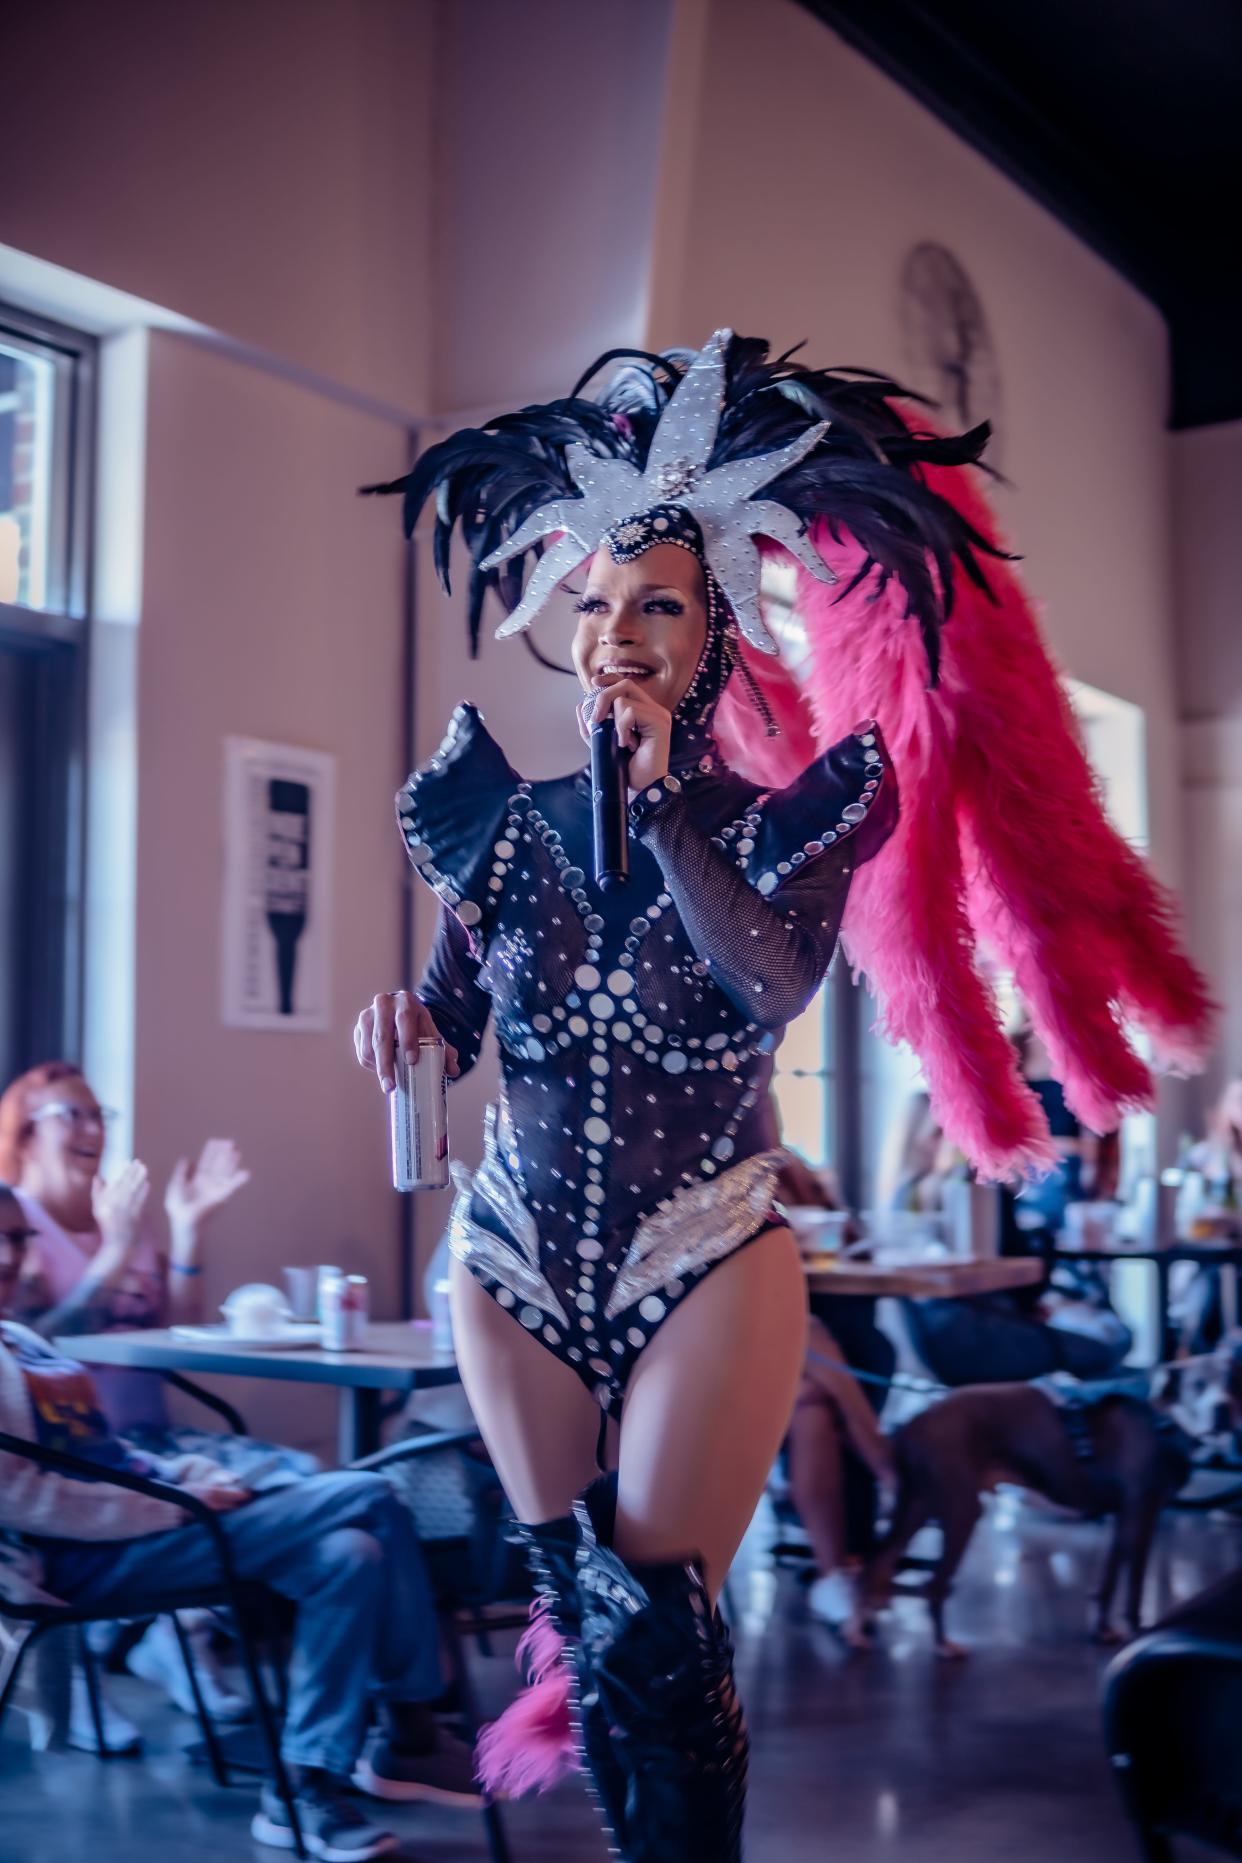 Alan Domingo performs as Alora Parque at a March 19 Carolina Drag Brunch event at Gaston Brewing Taproom in Fayetteville. Drag performers worry that if a bill pending in the North Carolina General Assembly becomes law, they could be arrested for their shows.